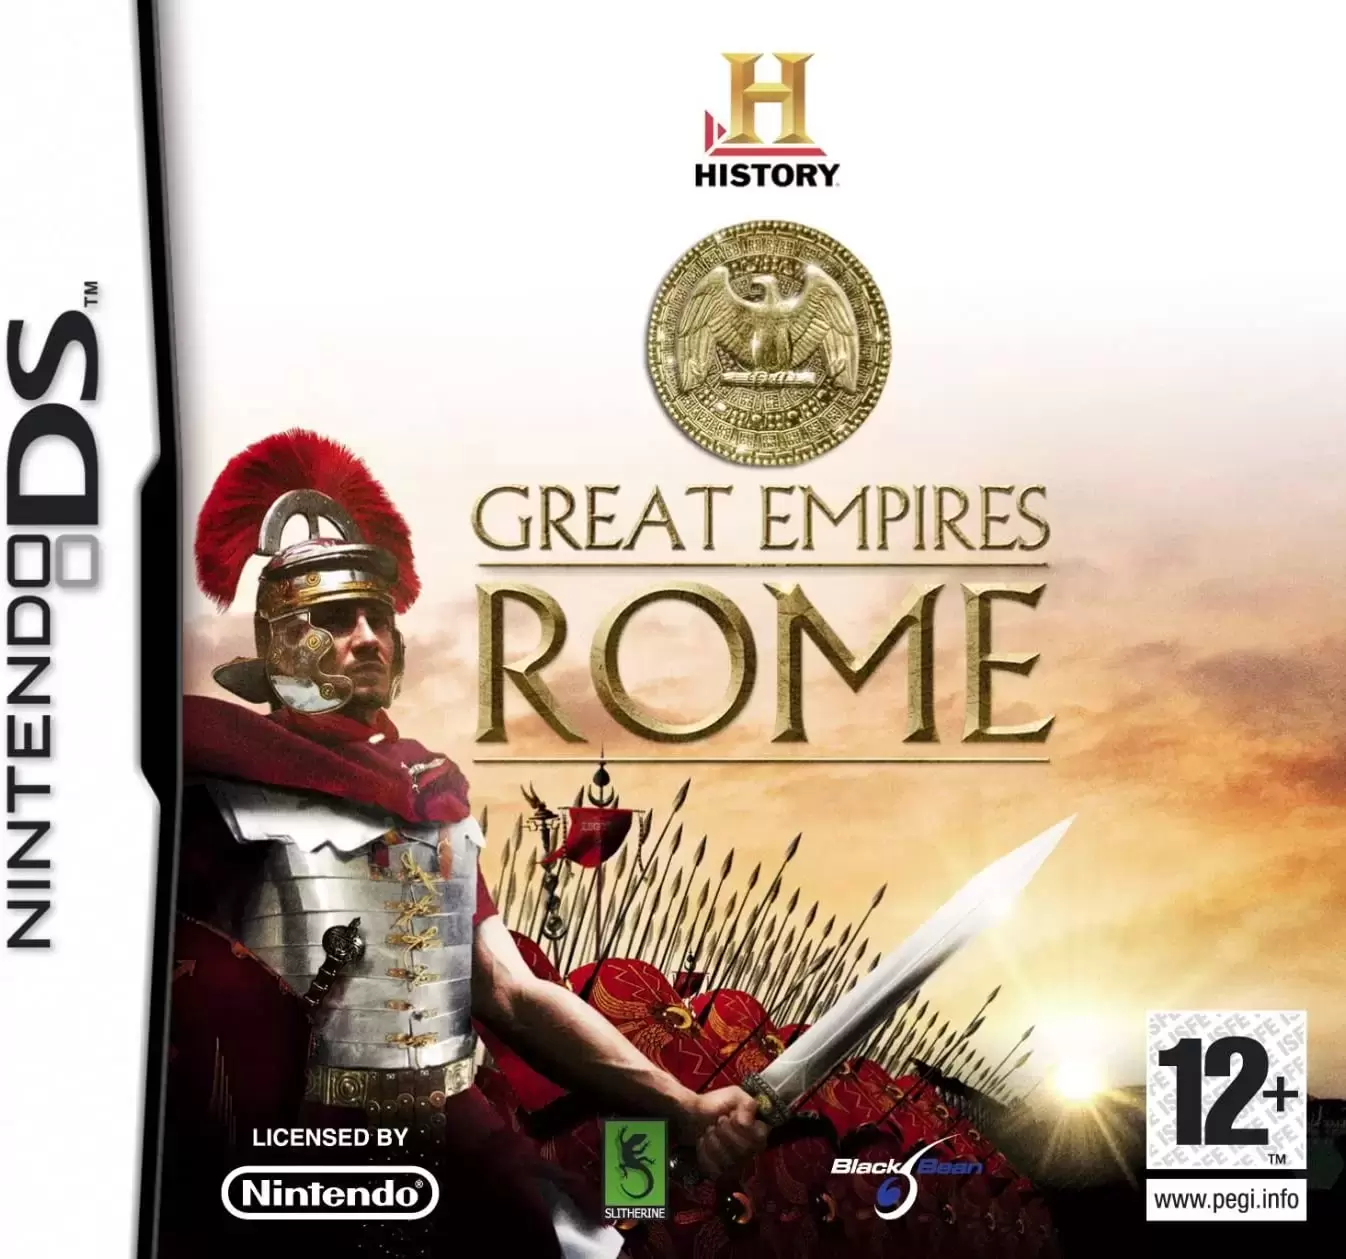 Nintendo DS Games - History, Great Empires Rome